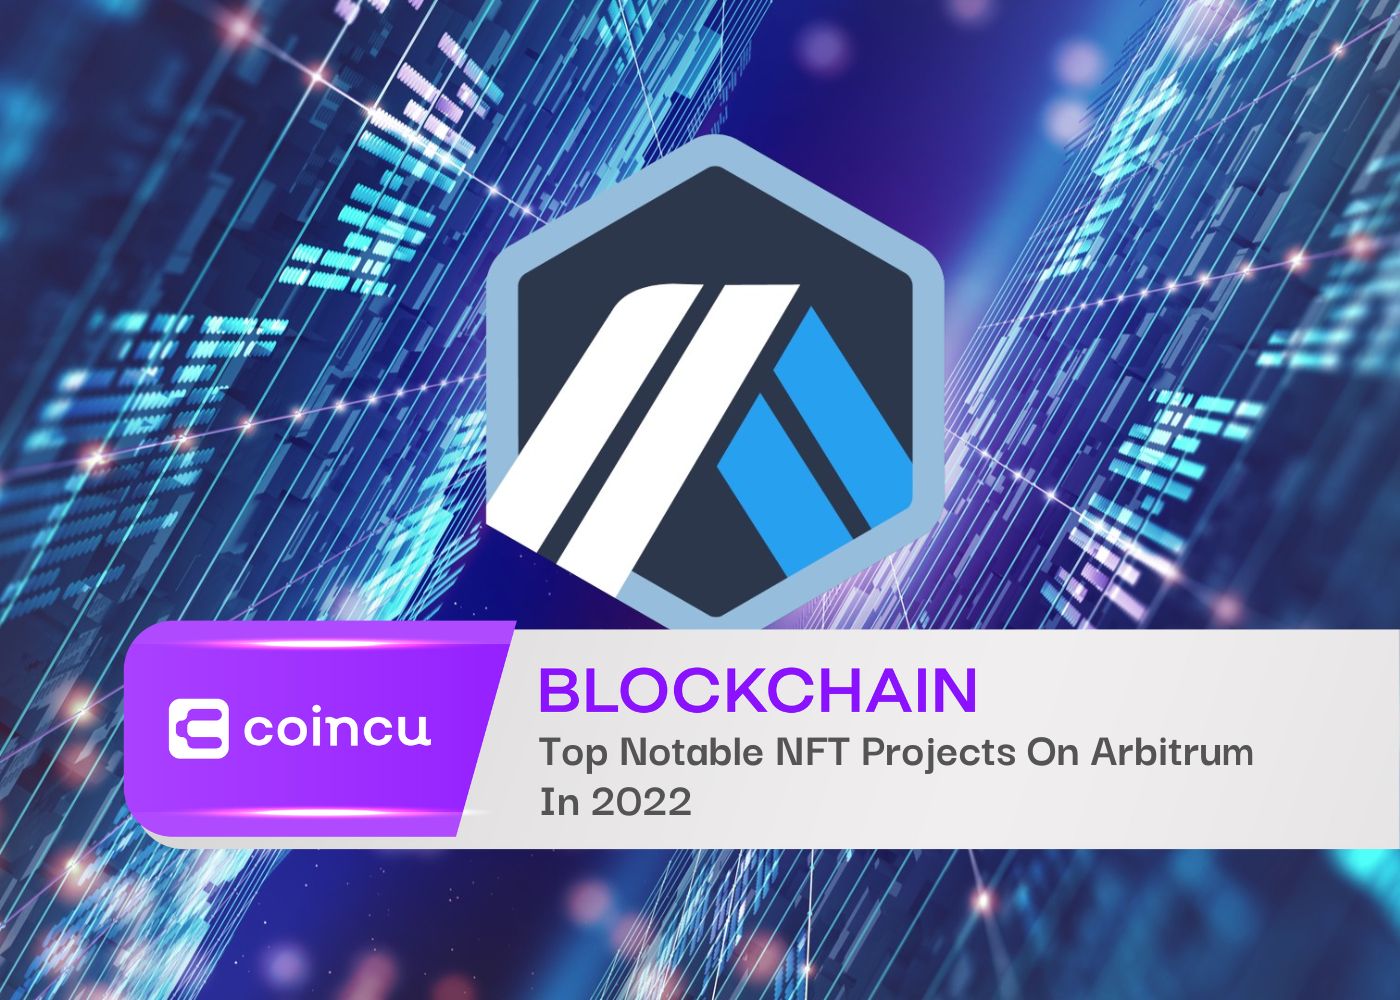 Top Notable NFT Projects On Arbitrum